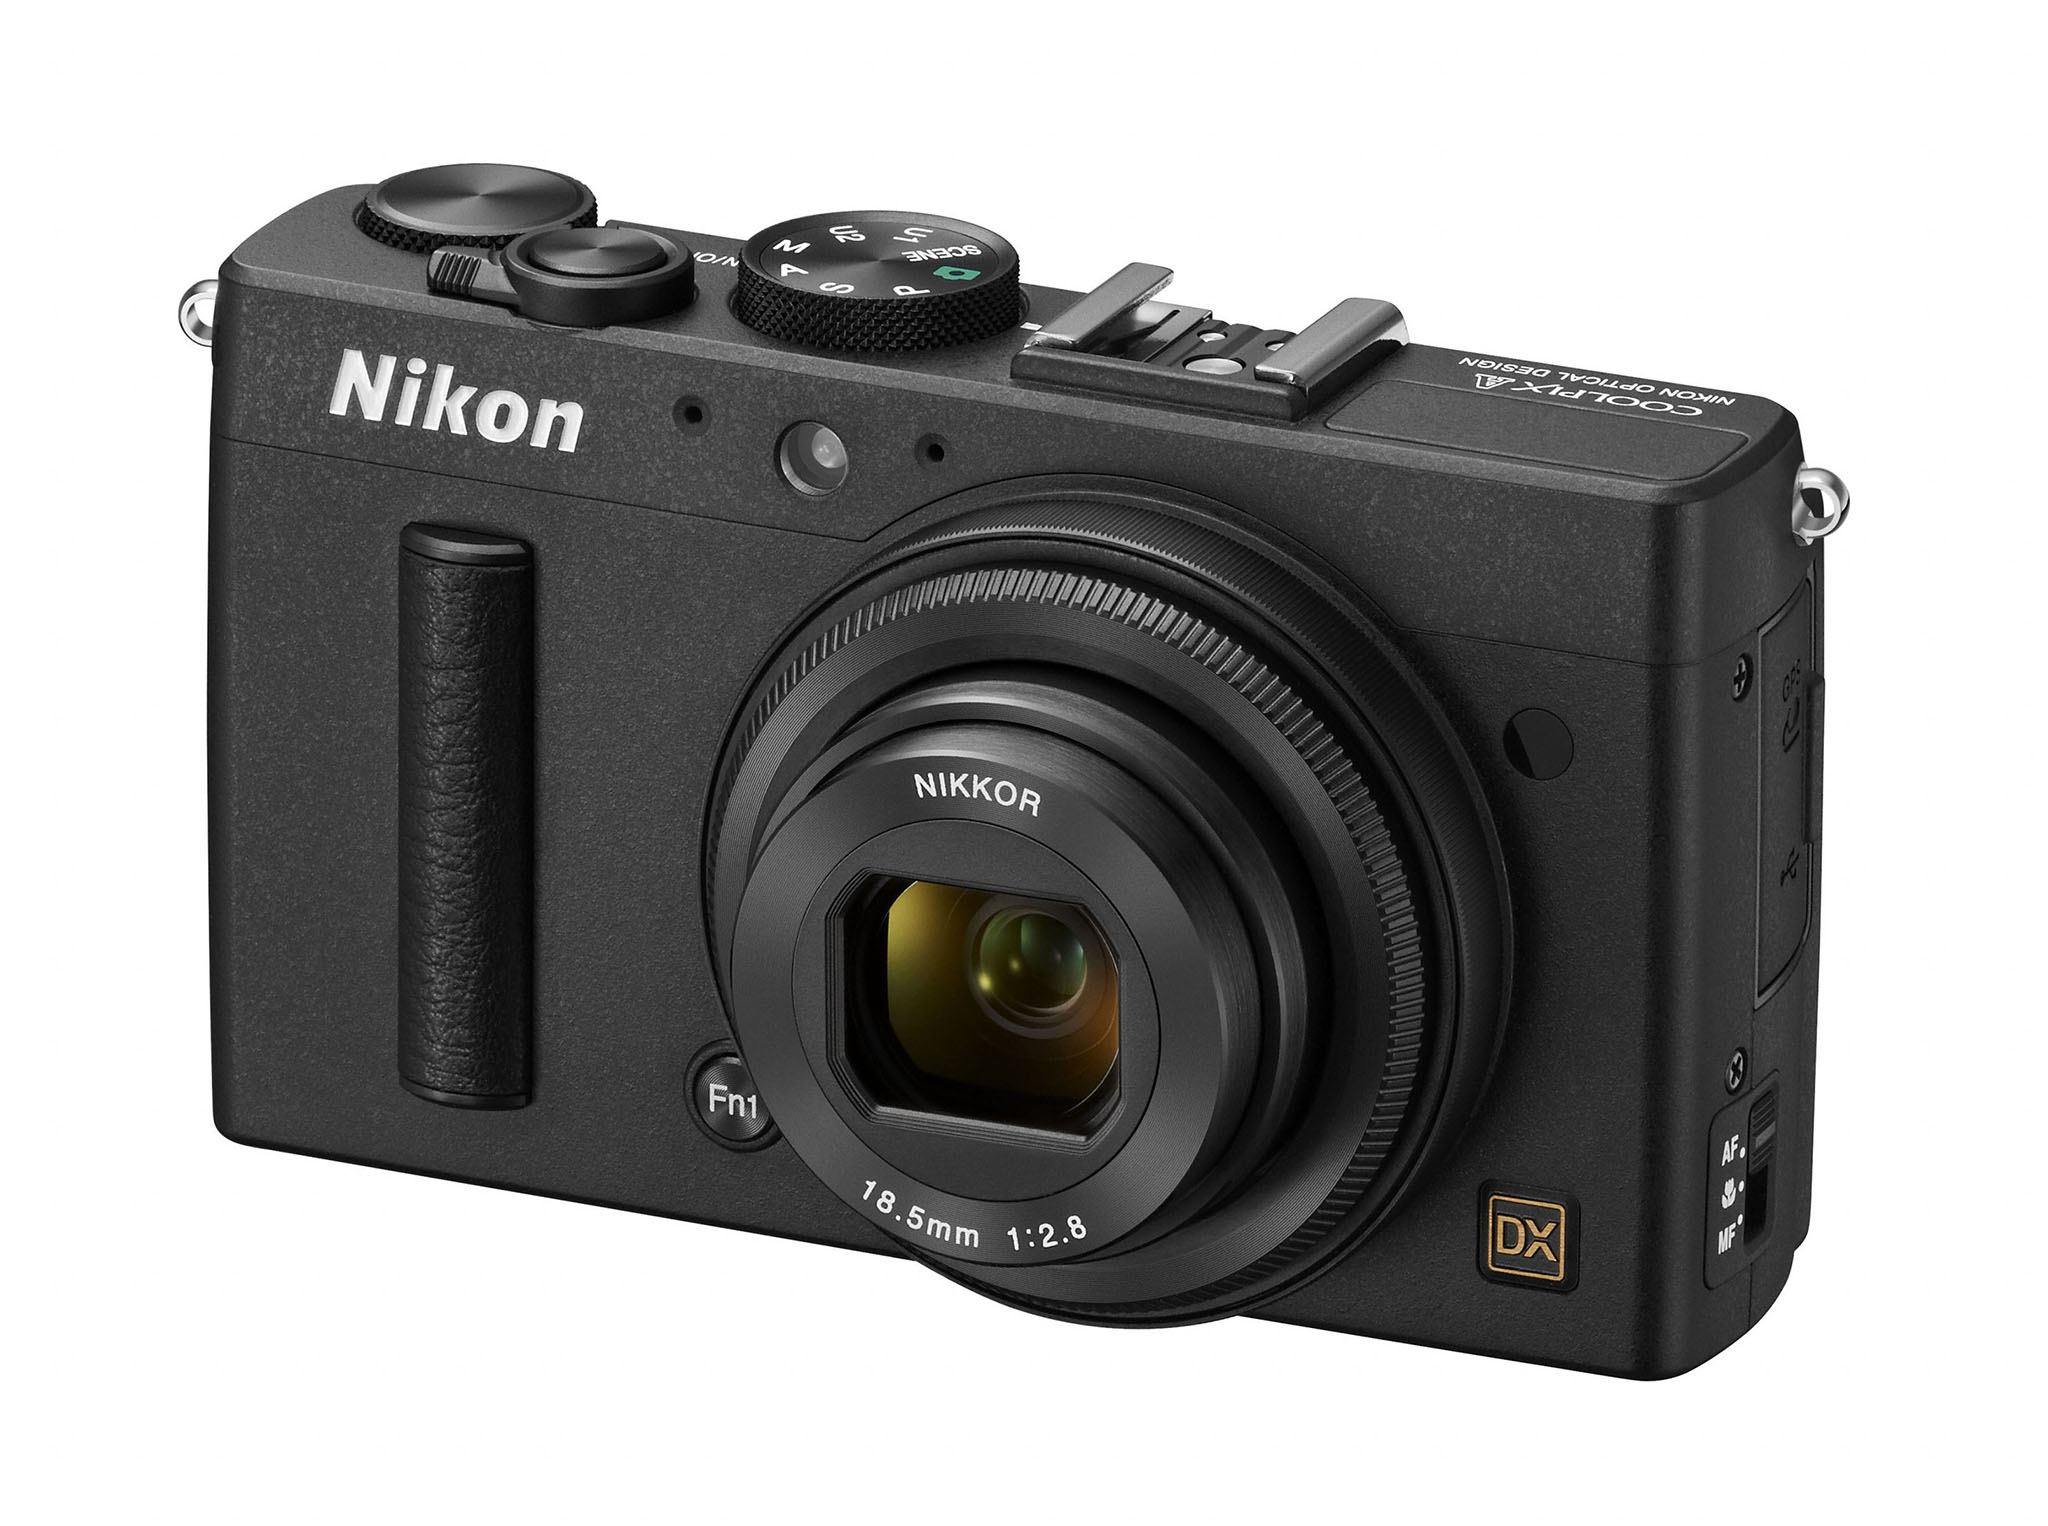 Nikon Coolpix A, APS-C Compact with 28mm Prime Lens - The Digital Story